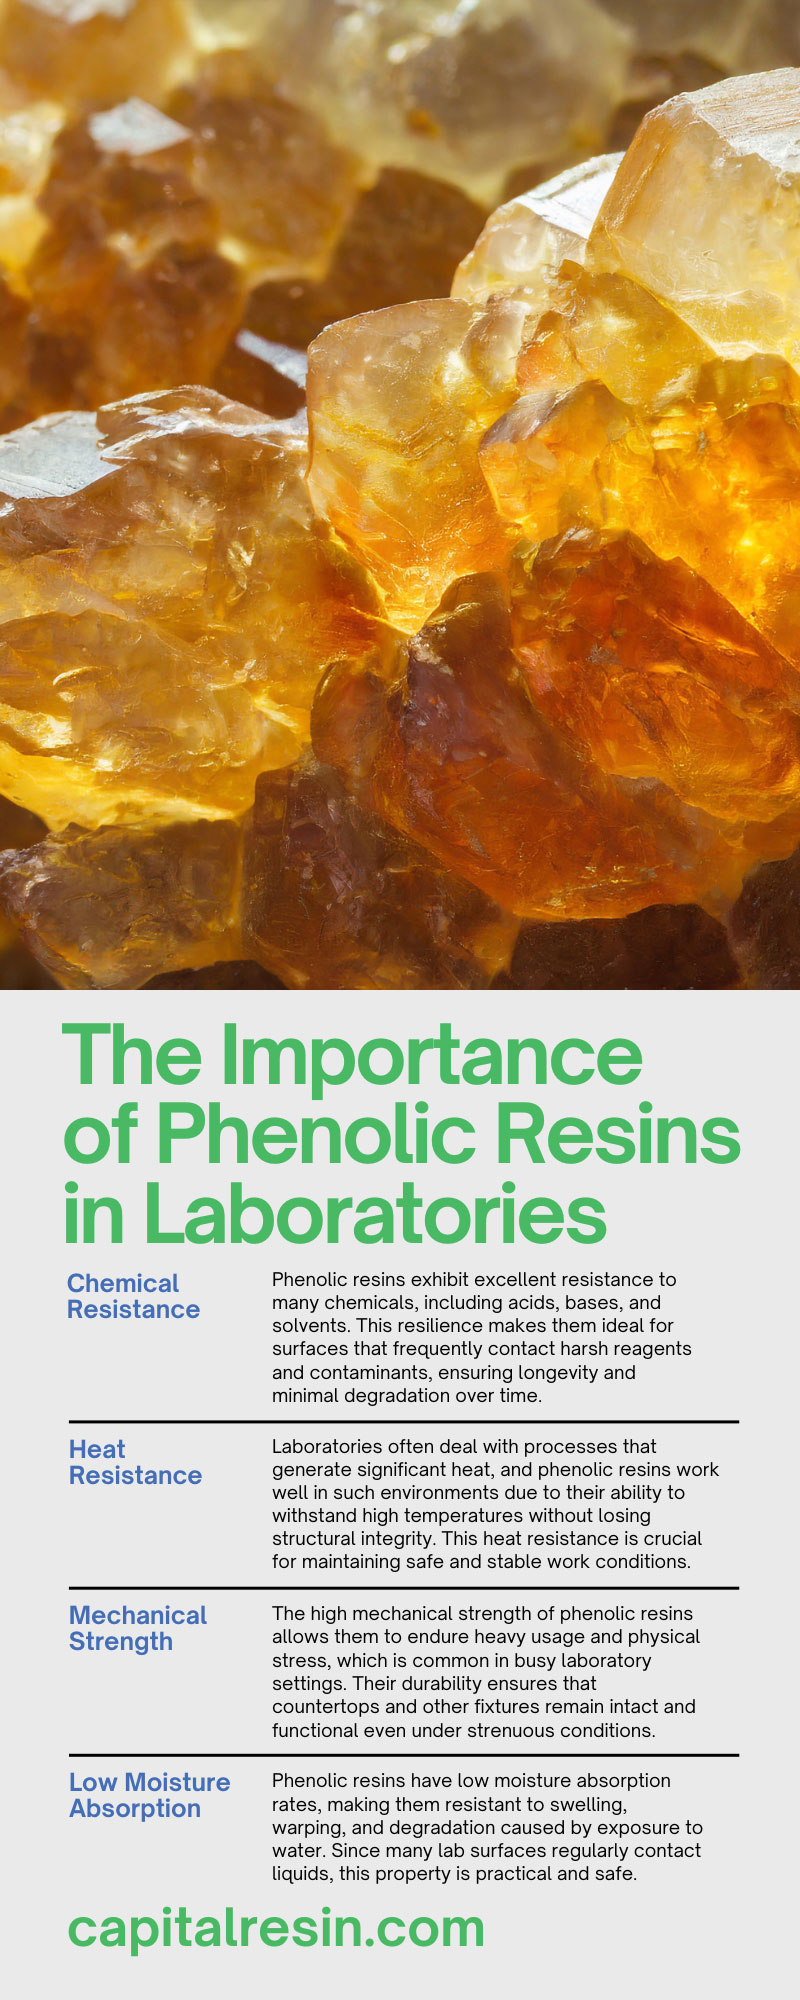 The Importance of Phenolic Resins in Laboratories
